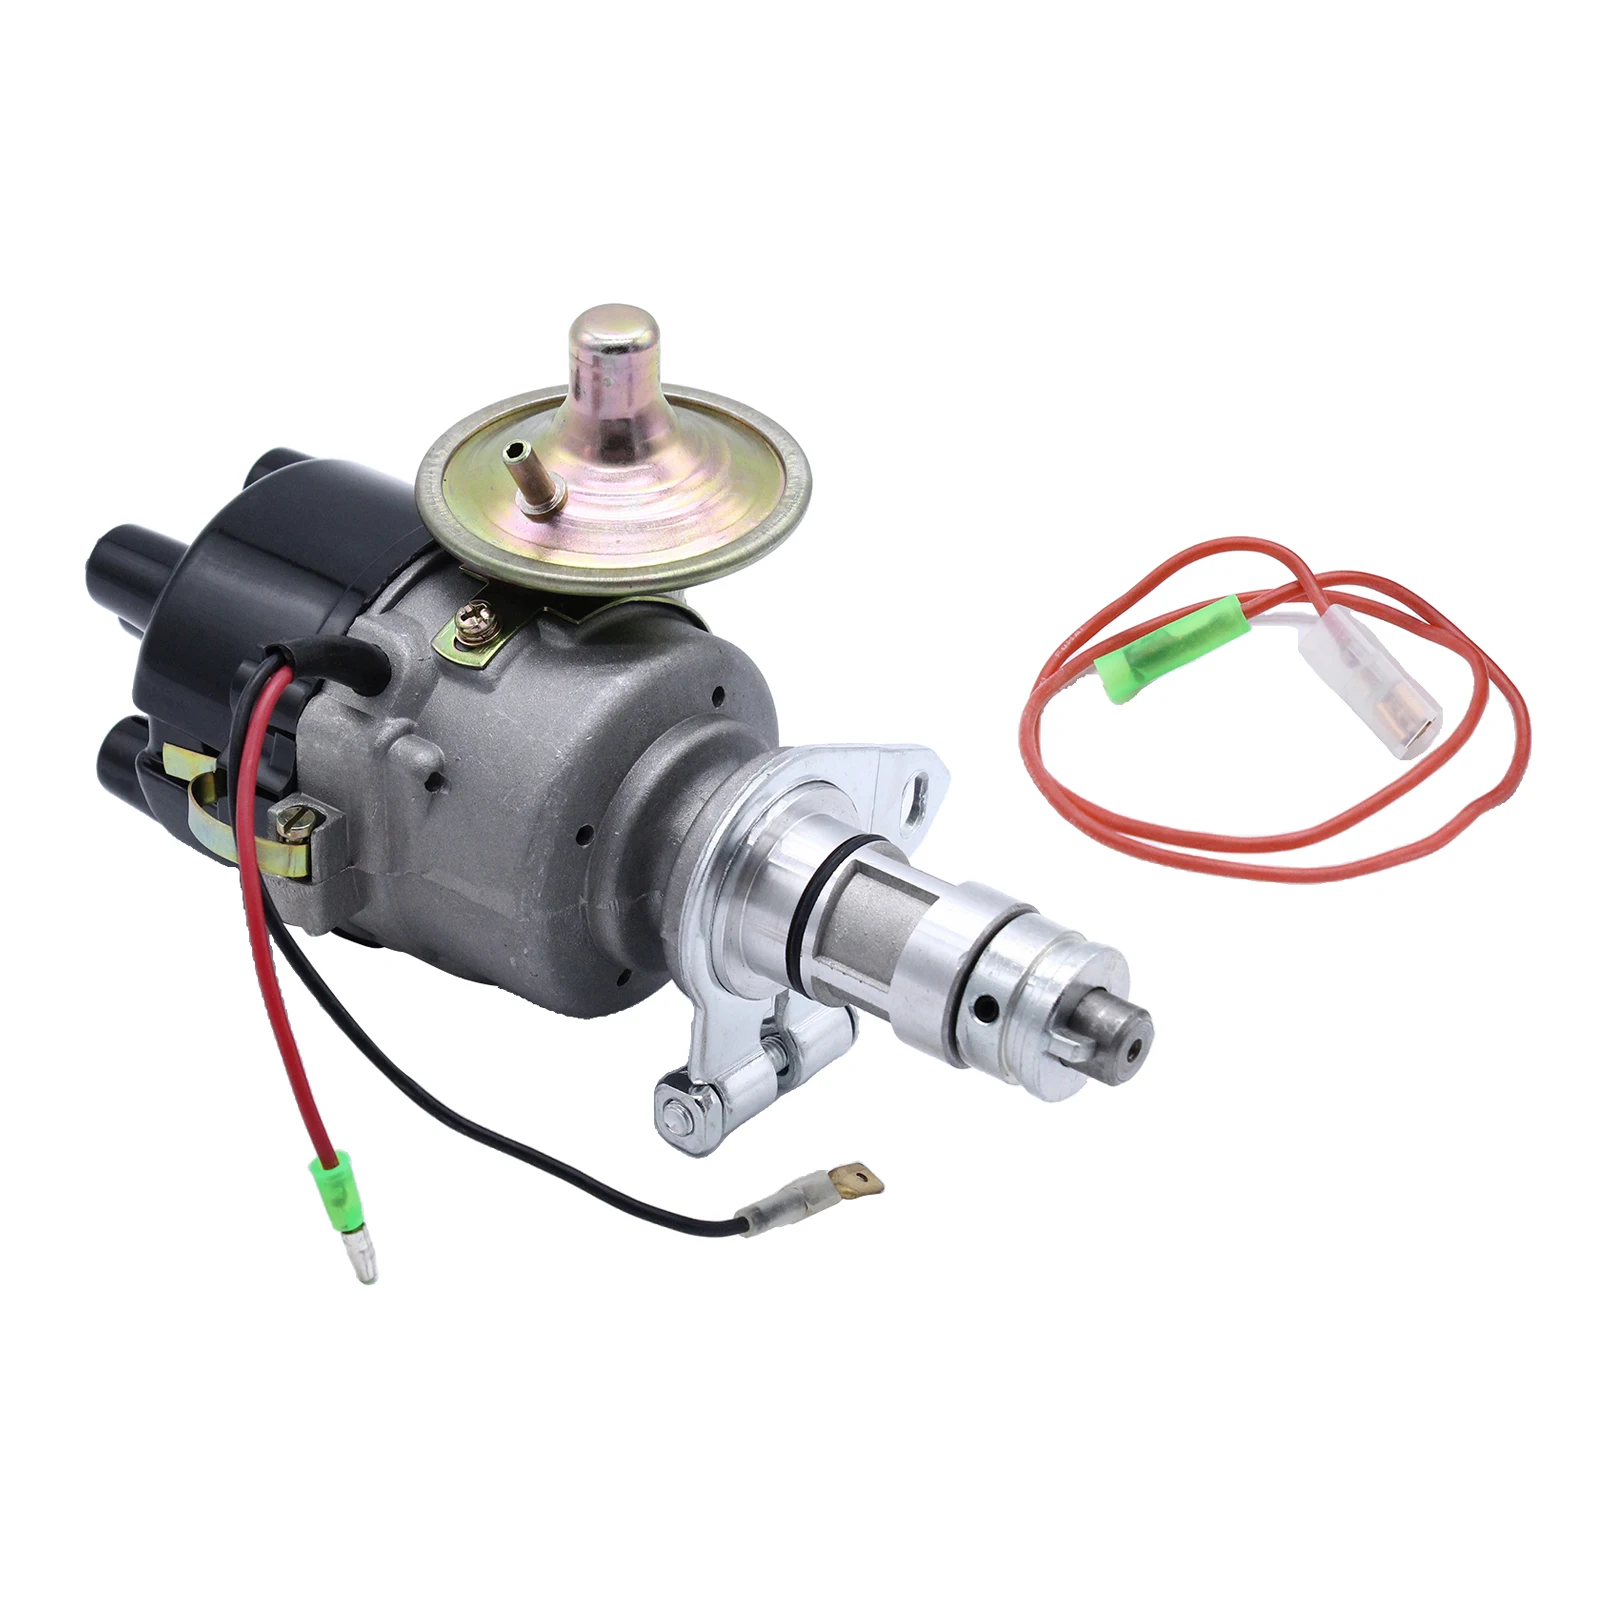 Alloy Car Electronic Distributor Replace Fits for Lucas 45D 25 